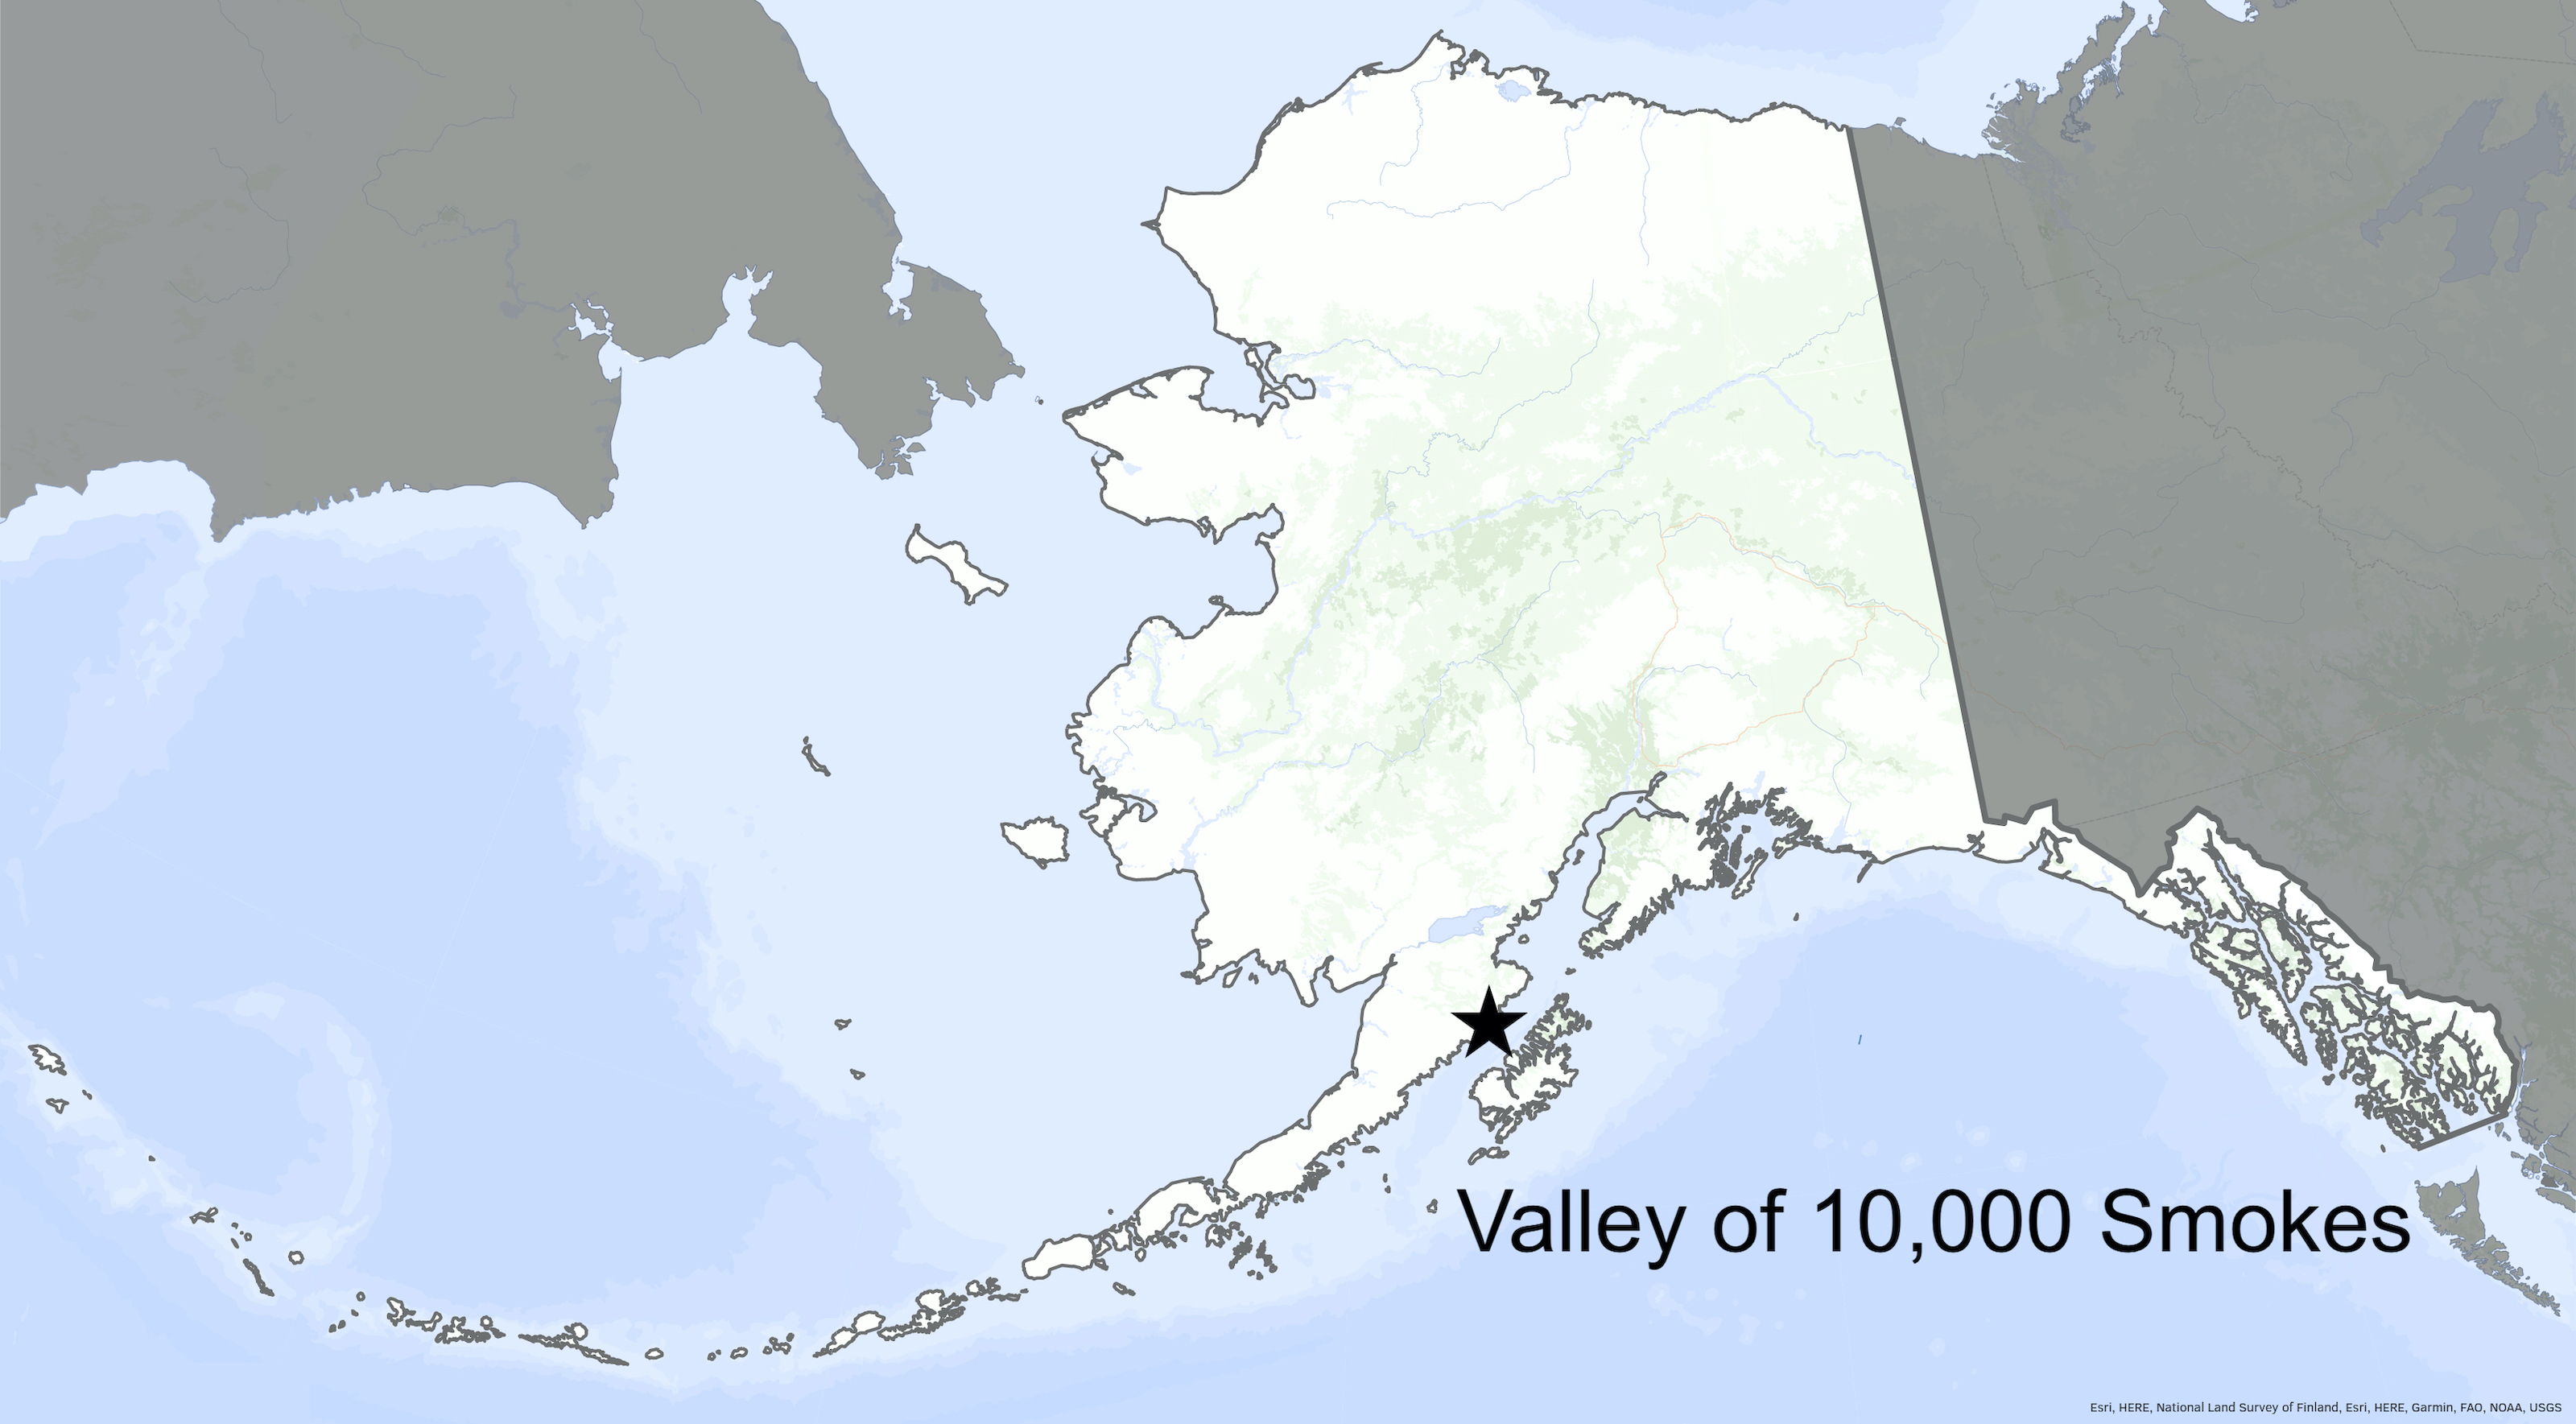 A star on a map indicates the location of the Valley of 10,000 Smokes on the Alaska Peninsula in southwestern Alaska.